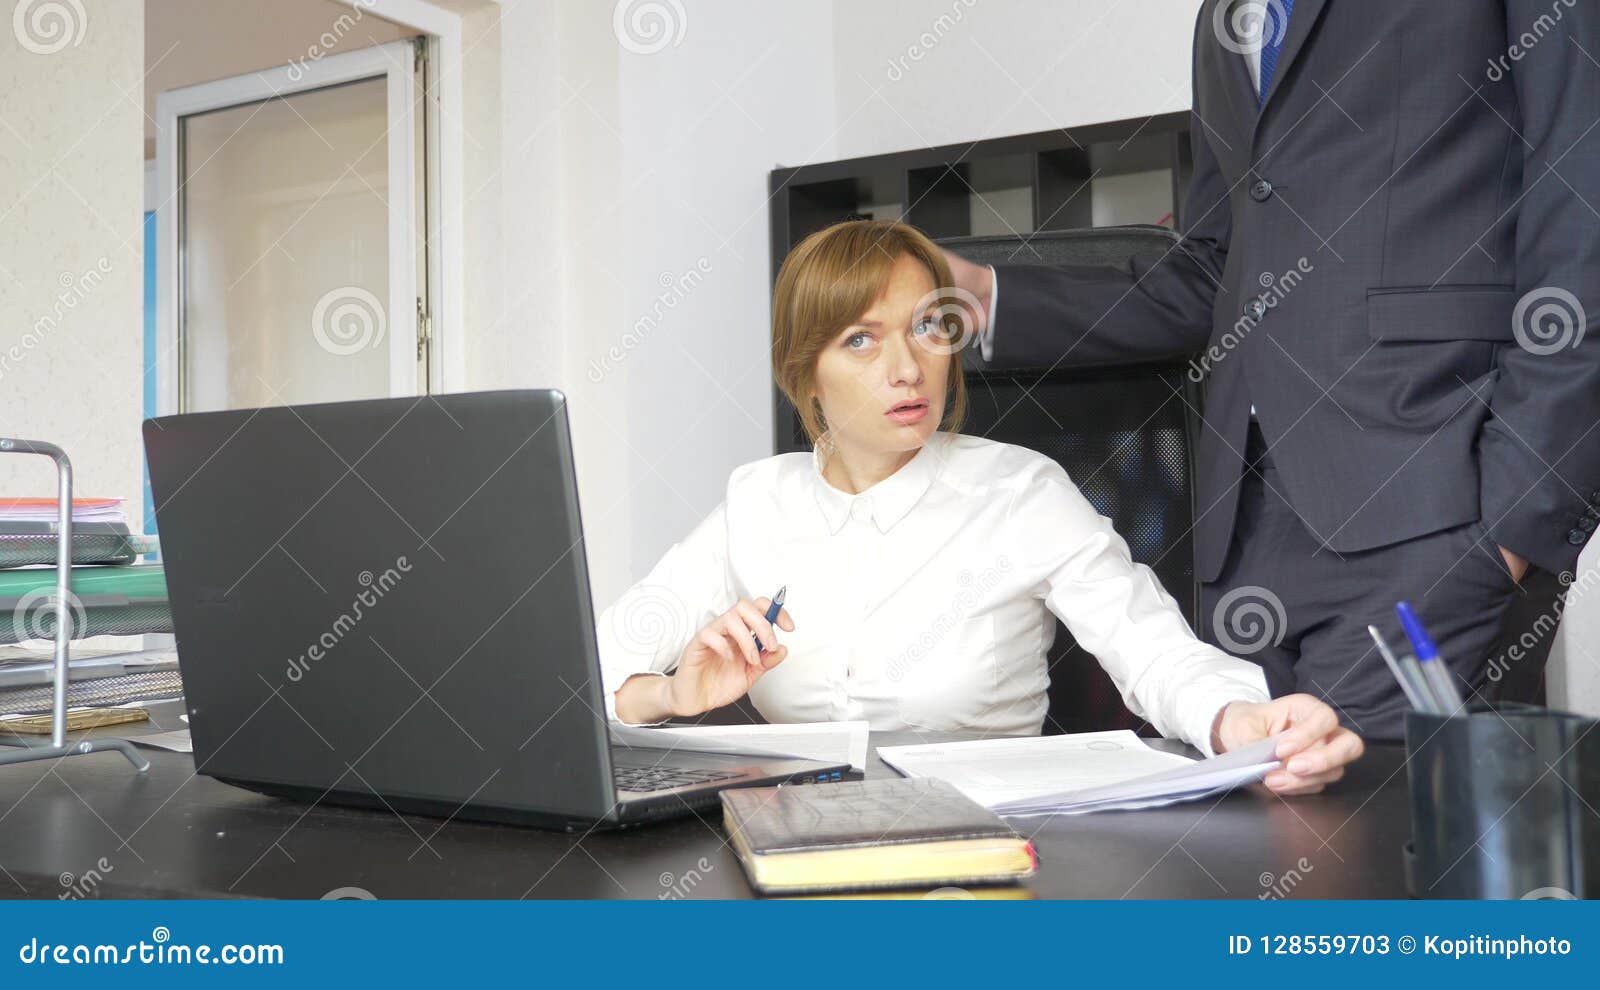 Sexual Harassment In The Office Two A Man And A Woman In The Office 